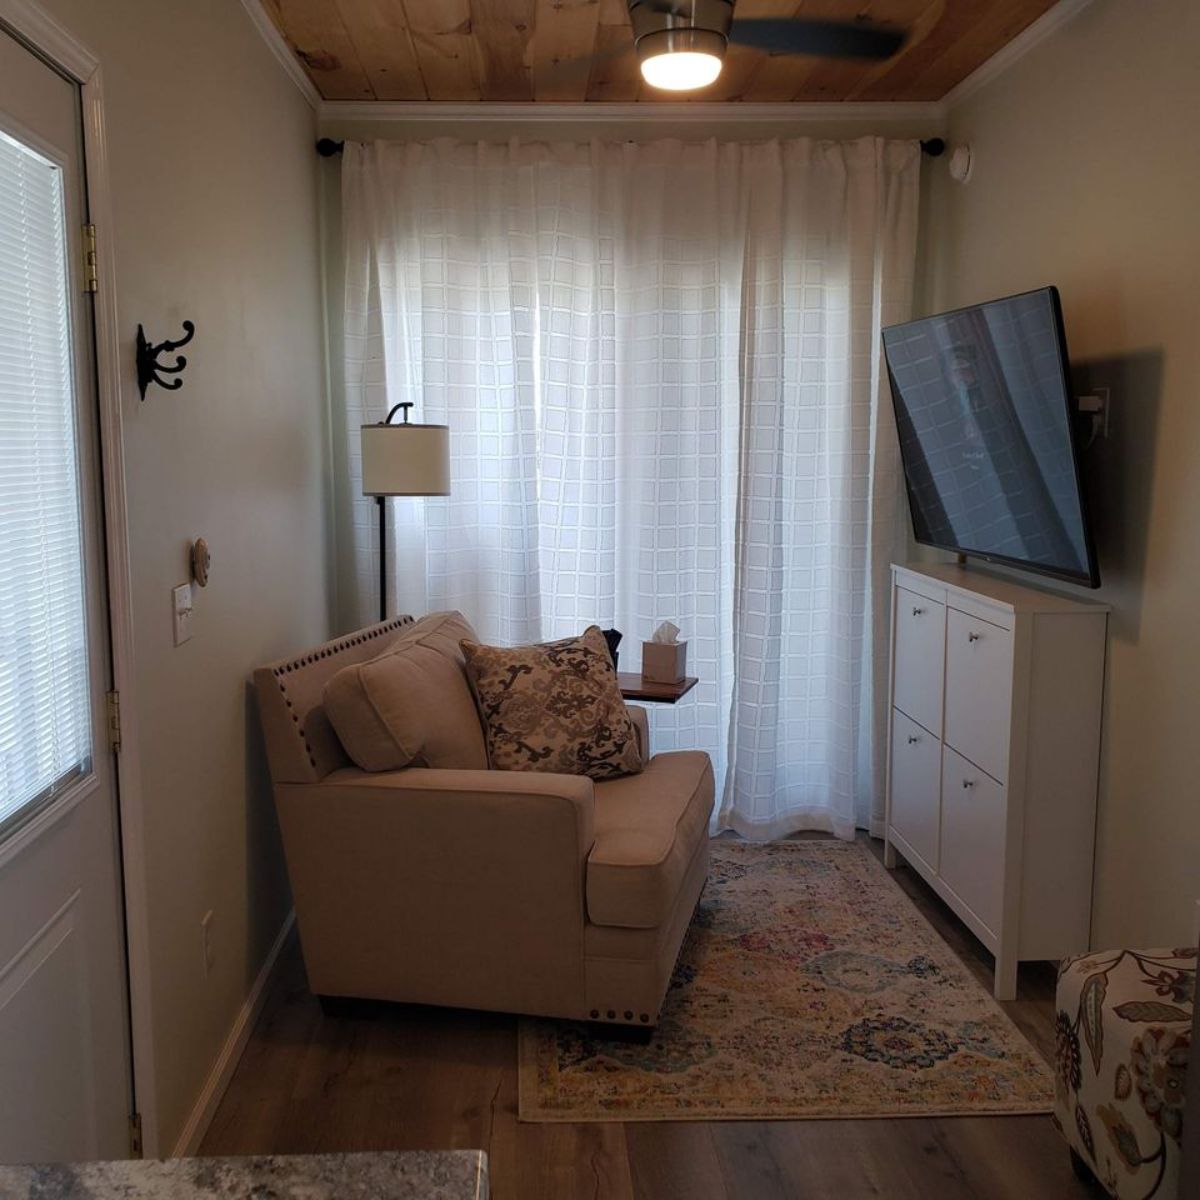 living area of container tiny home has a couch, entertainment unit and wall mounted TV set